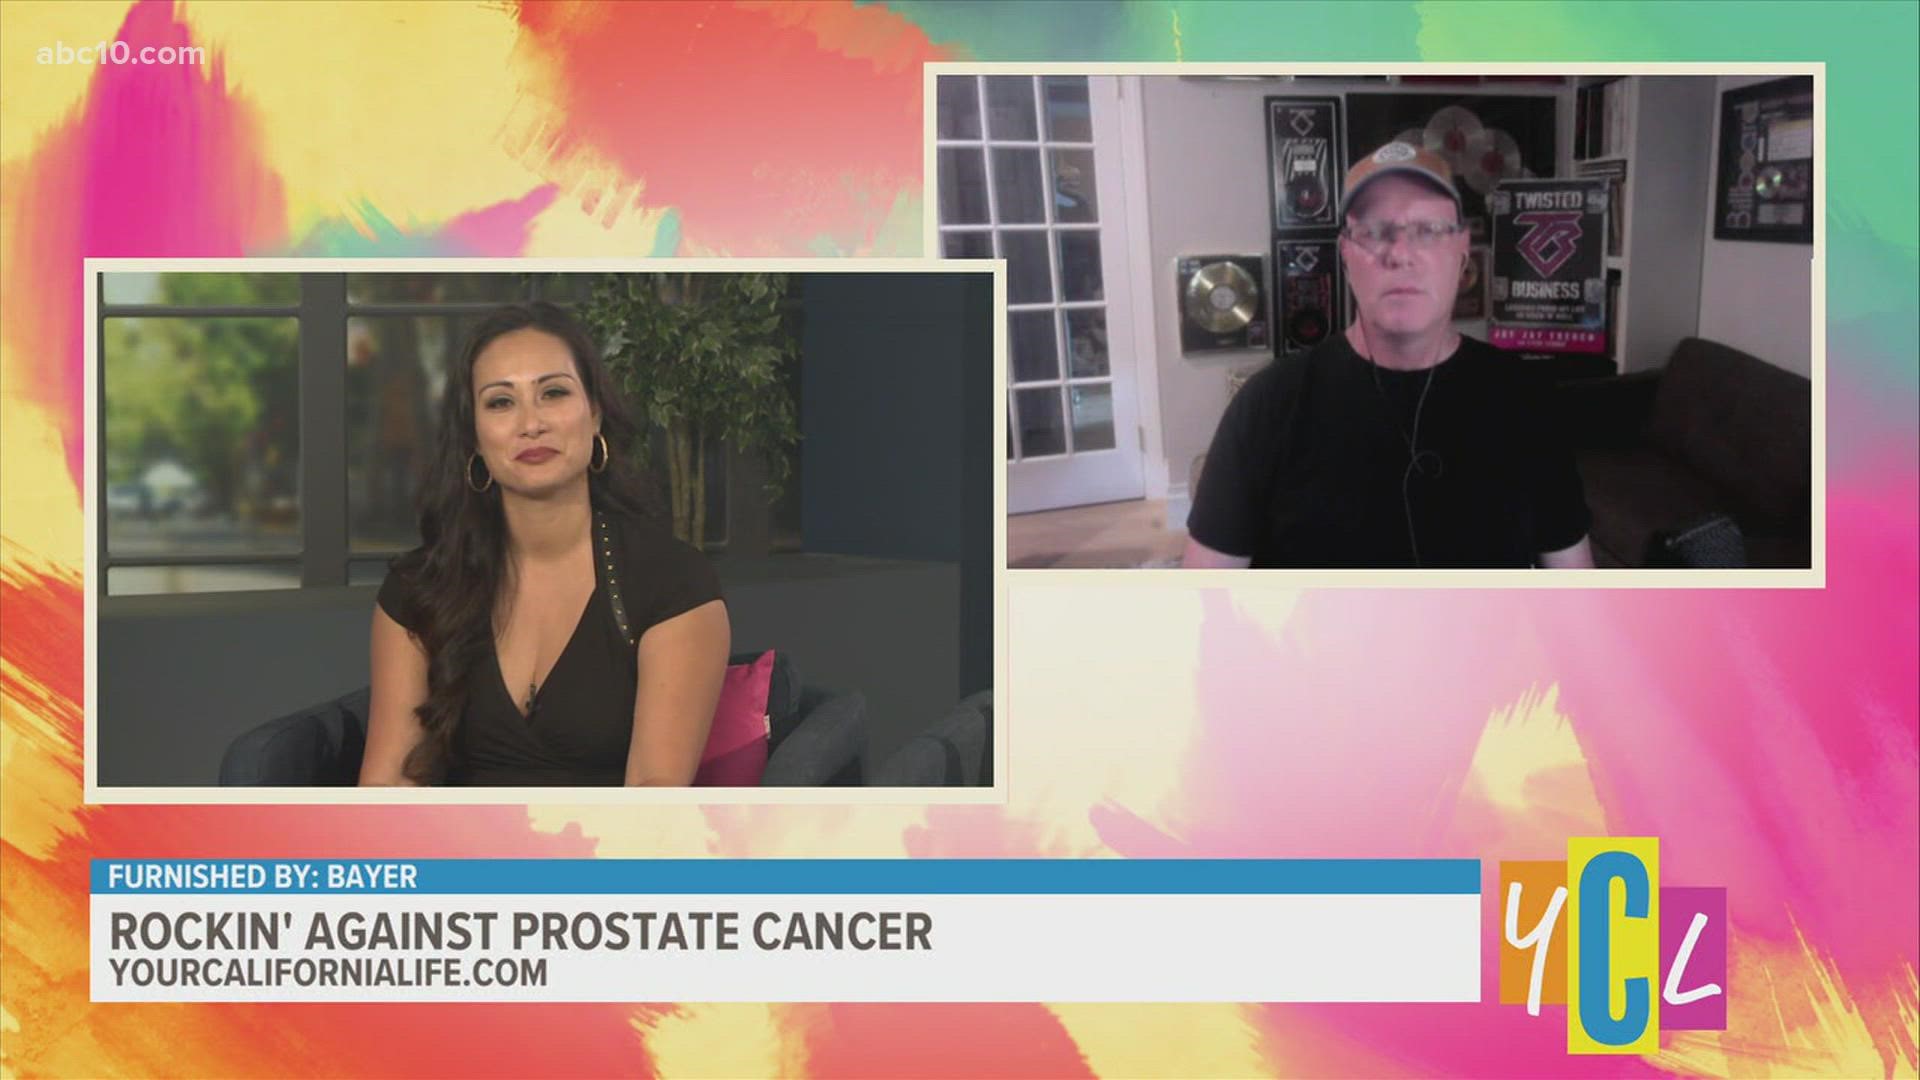 Twisted Sister guitarist and co-founder Jay Jay French is rockin' against prostate cancer, and shares his personal story as a survivor of the disease.